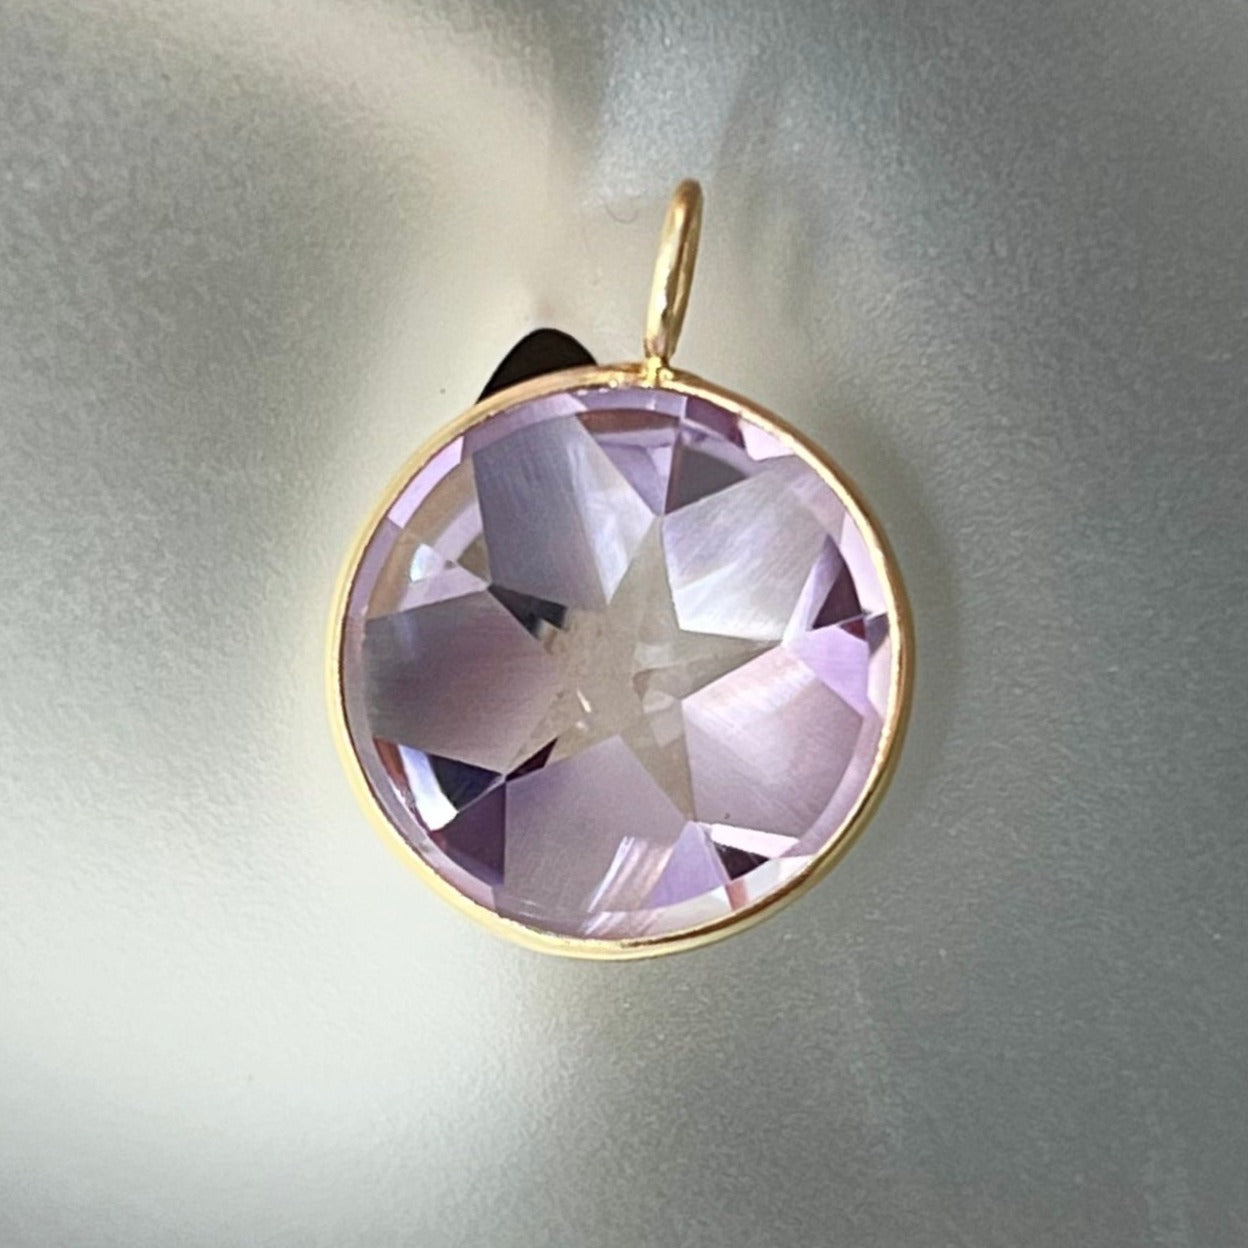 5.5CT Round Star Cut Rose of France Natural Amethyst 14K Yellow Gold Pendant Charm